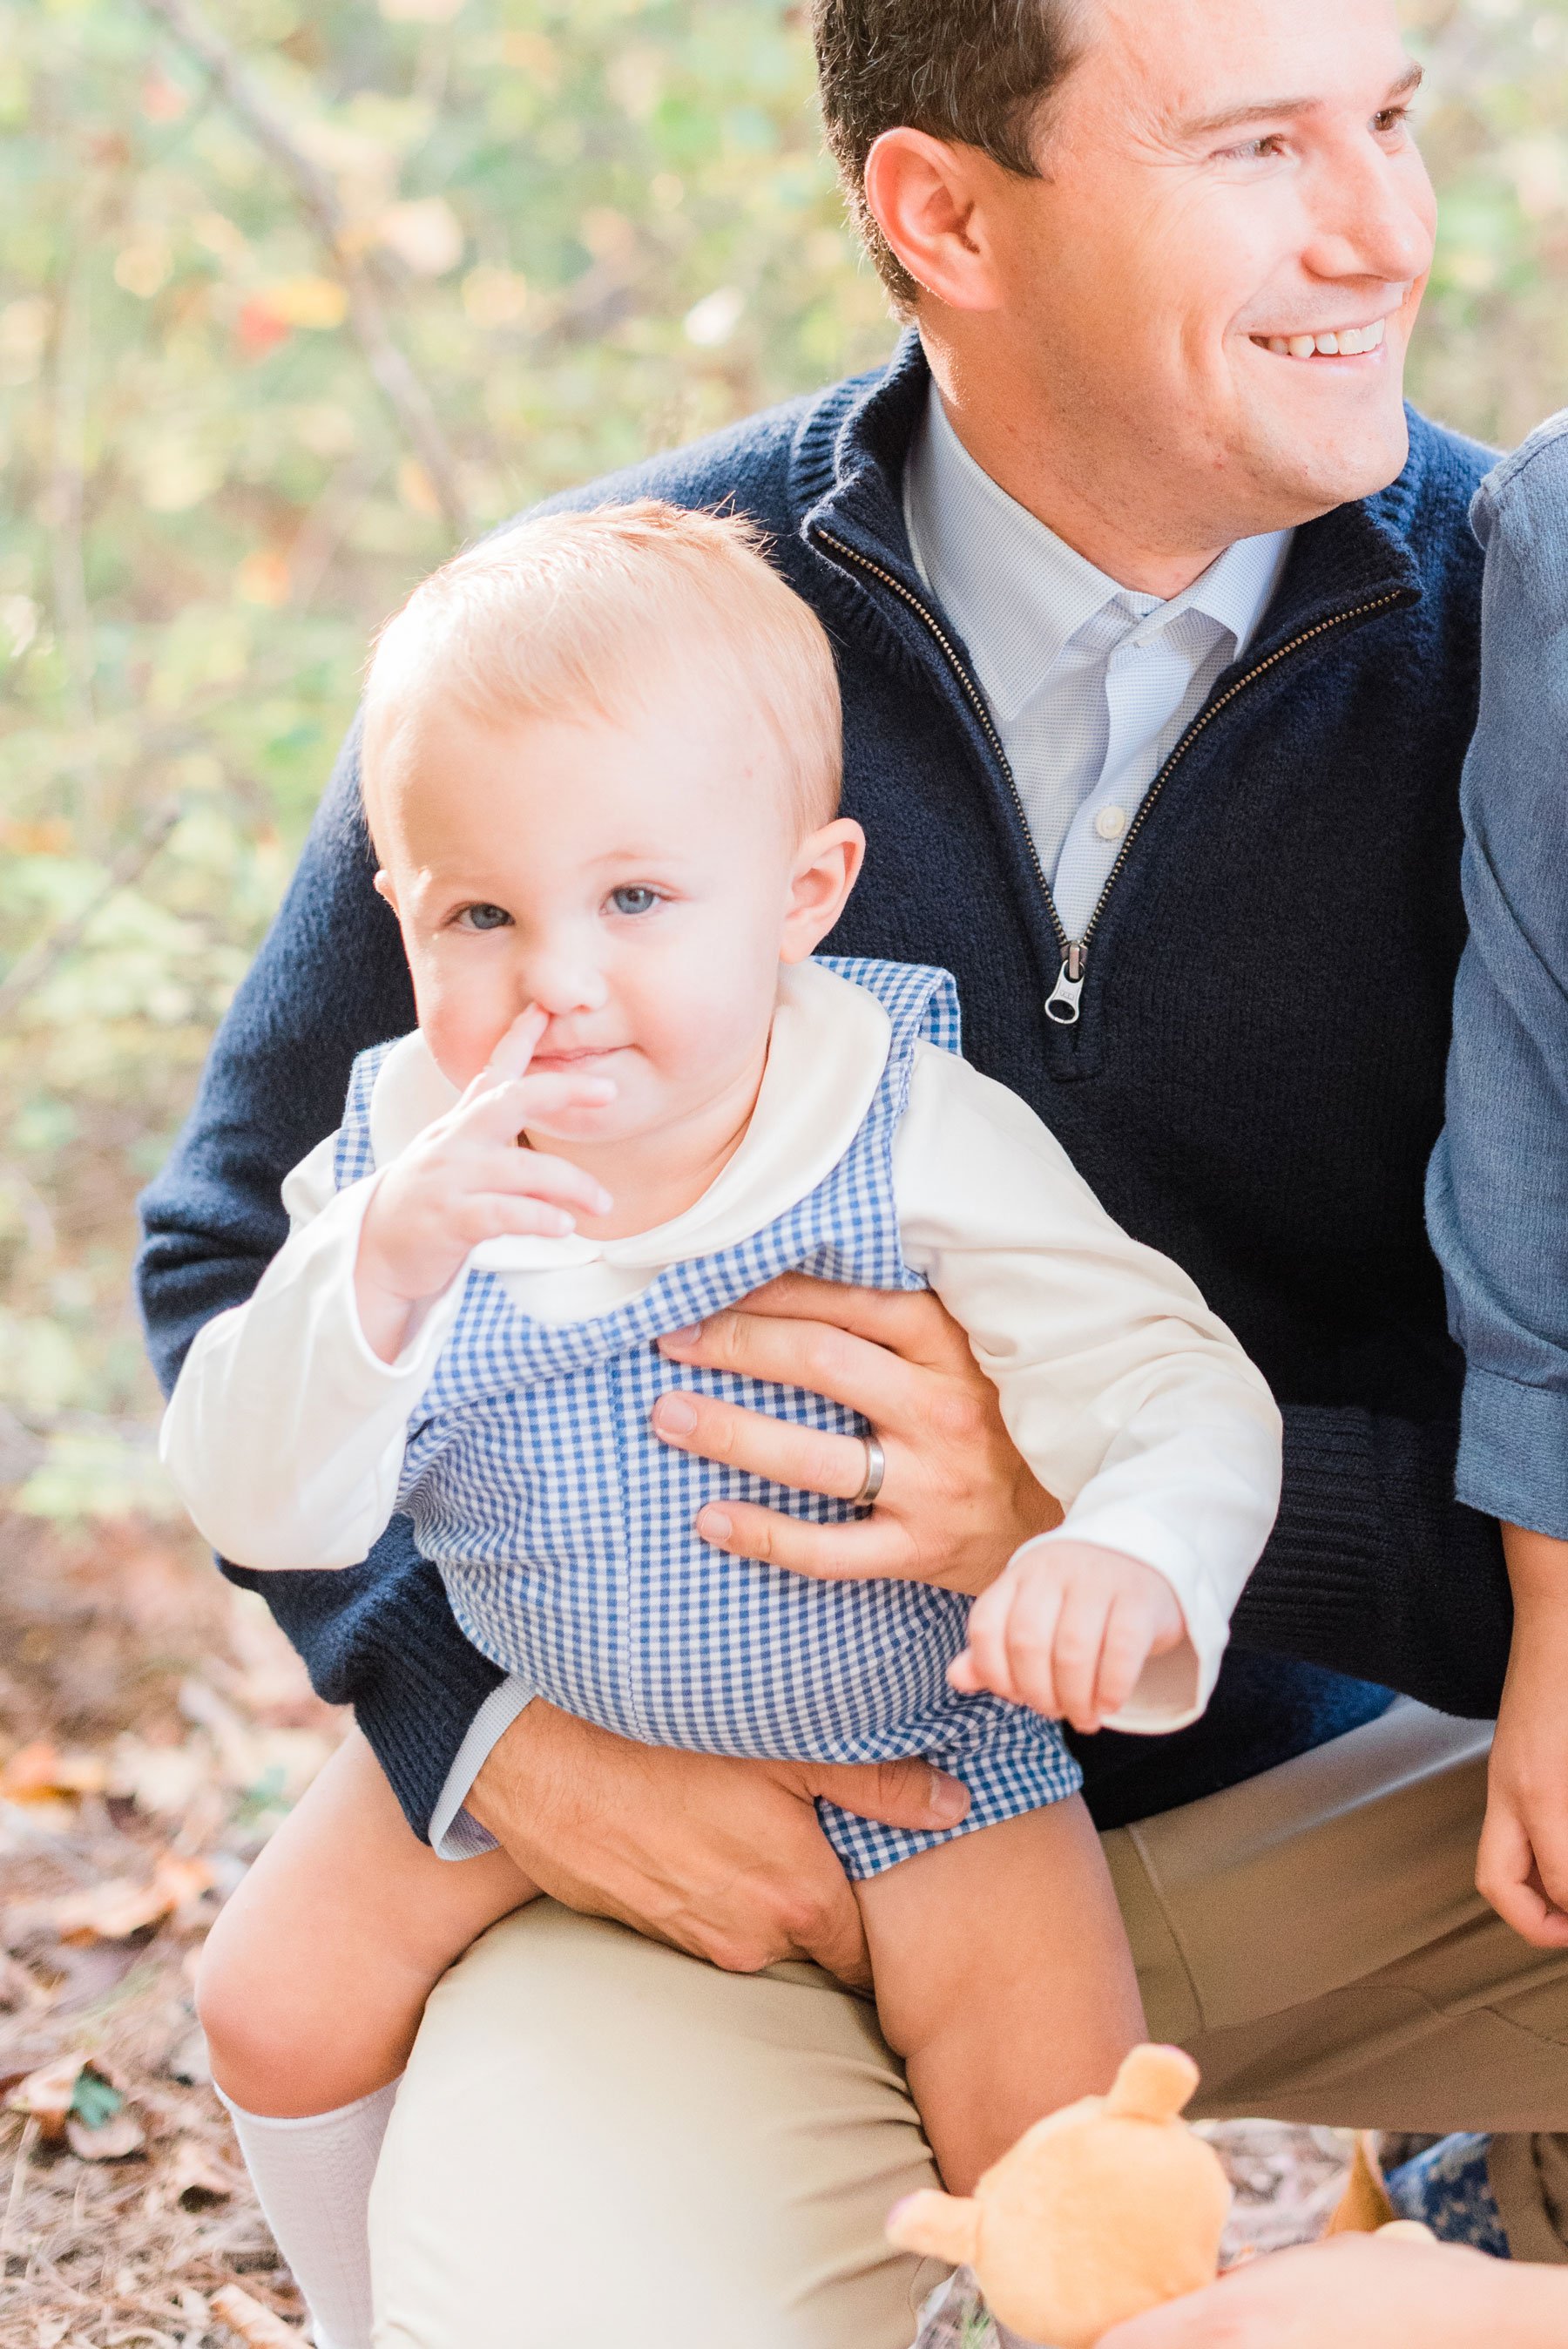  A candid shot of a little girl picking her nose on her dad’s lap is captured by Atlanta-based photographer, Jacquie Erickson. infant daughter funny photo nose picking&nbsp; #photoshootoutfits #photocolorpalette #familypictures #atlantaphotographer 